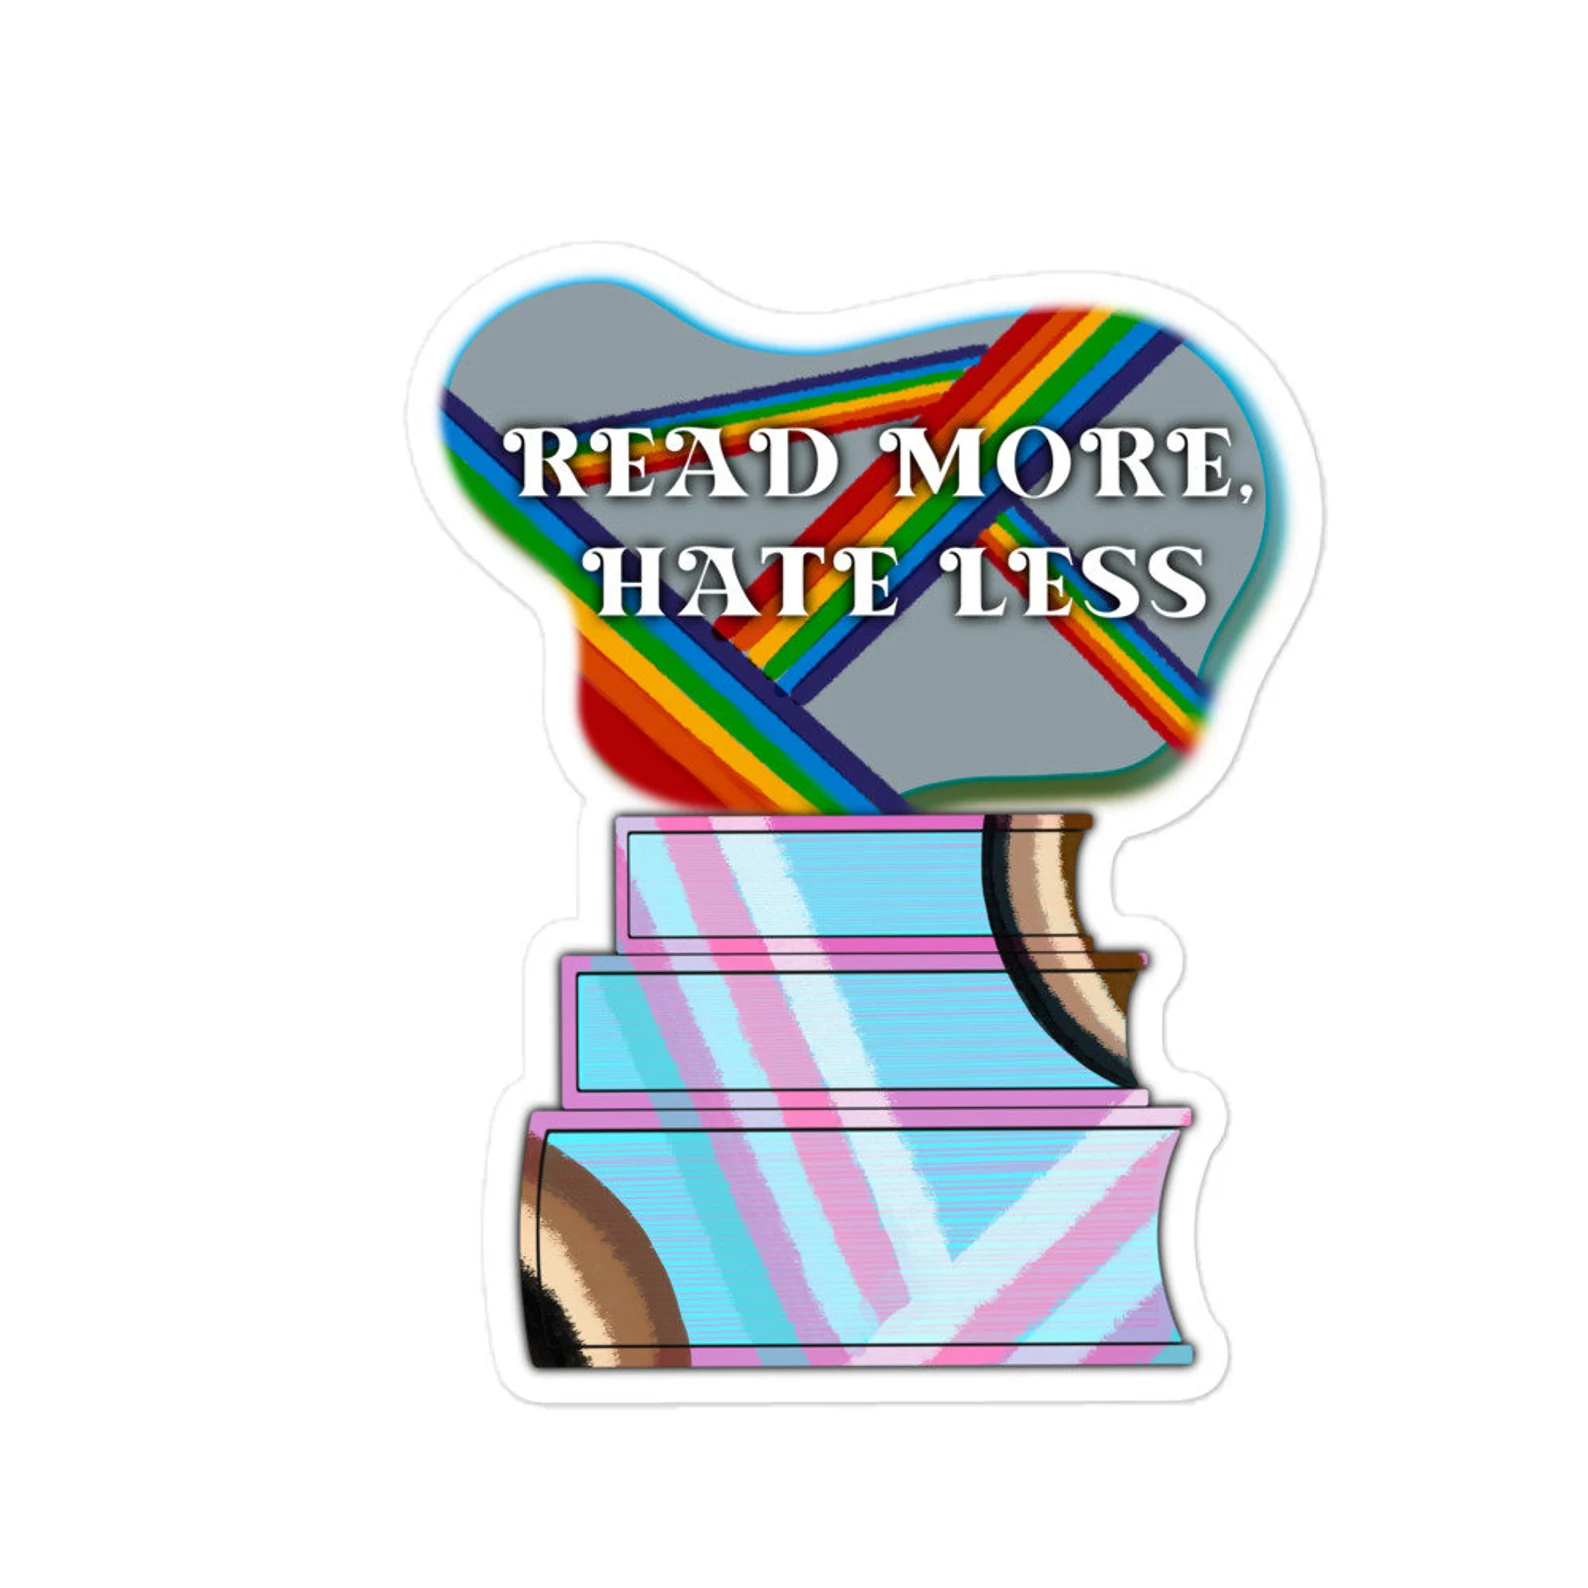 Image of a sticker with a stack of books It says "read more, hate less," and includes elements of the pride flag. 